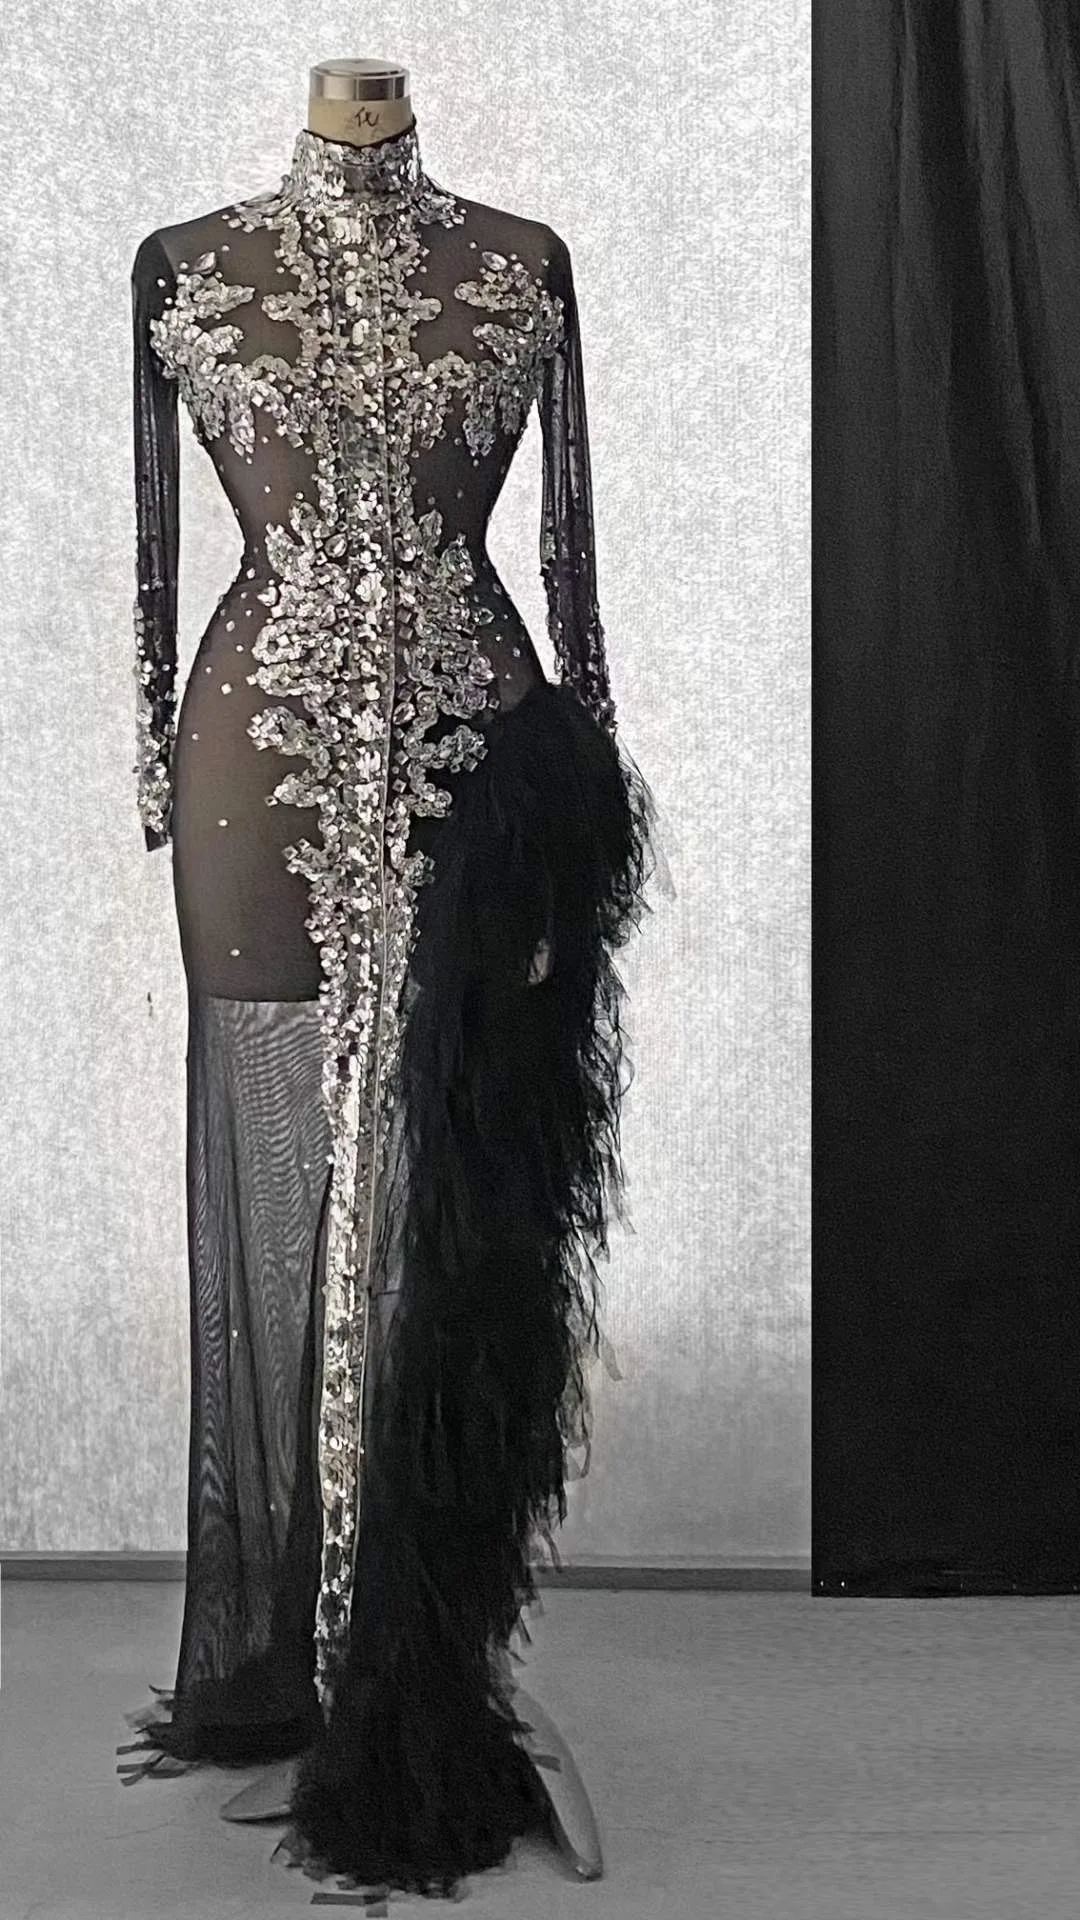 Black Gauze Perspective Shining Sequins Rhinestones Sexy High Slit Dress For Women Evening Celebrity Clothing Prom Stage Costume